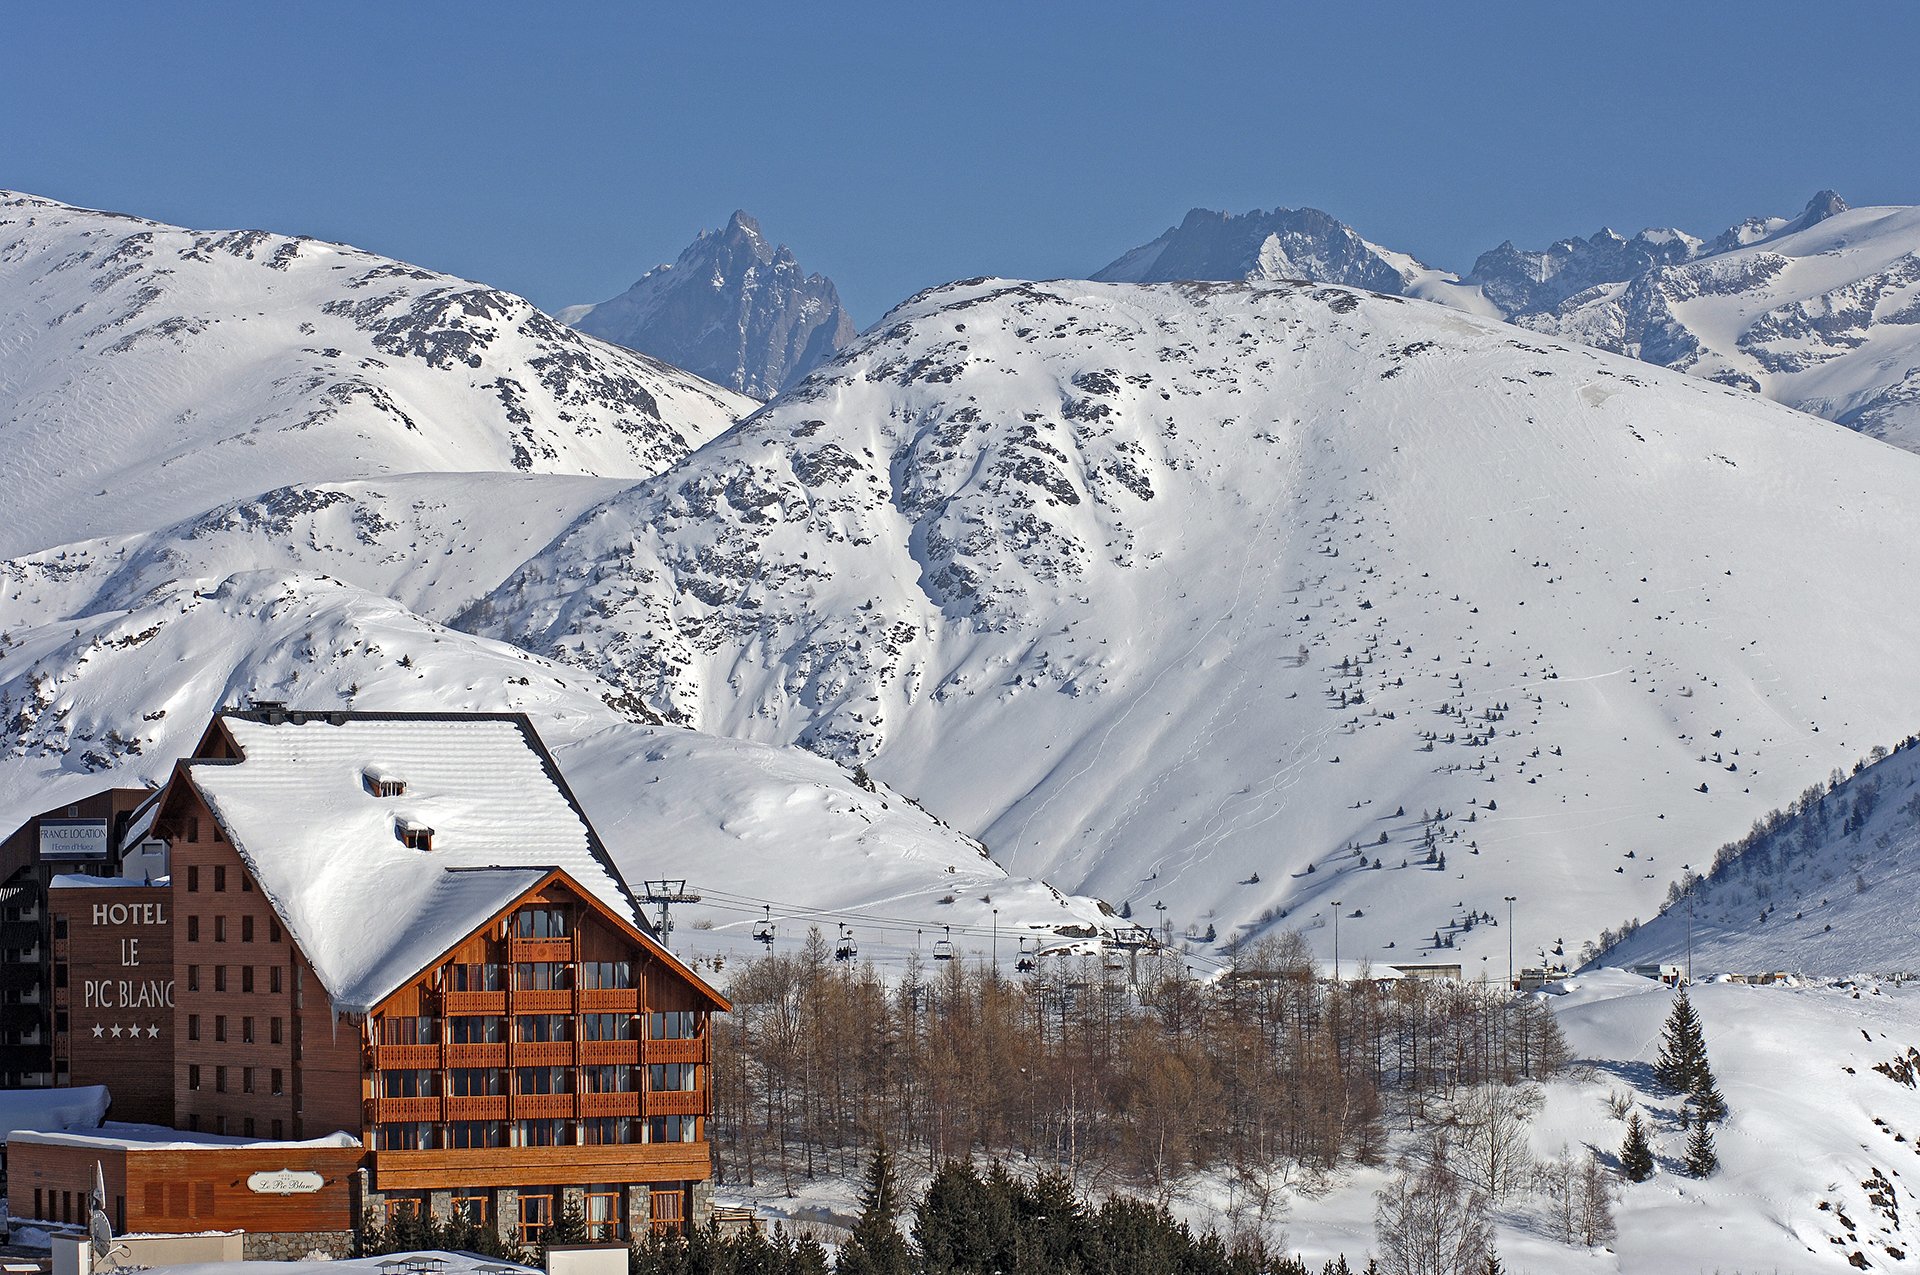 Summer view of the Hotel Pic Blanc in Alpe d'Huez